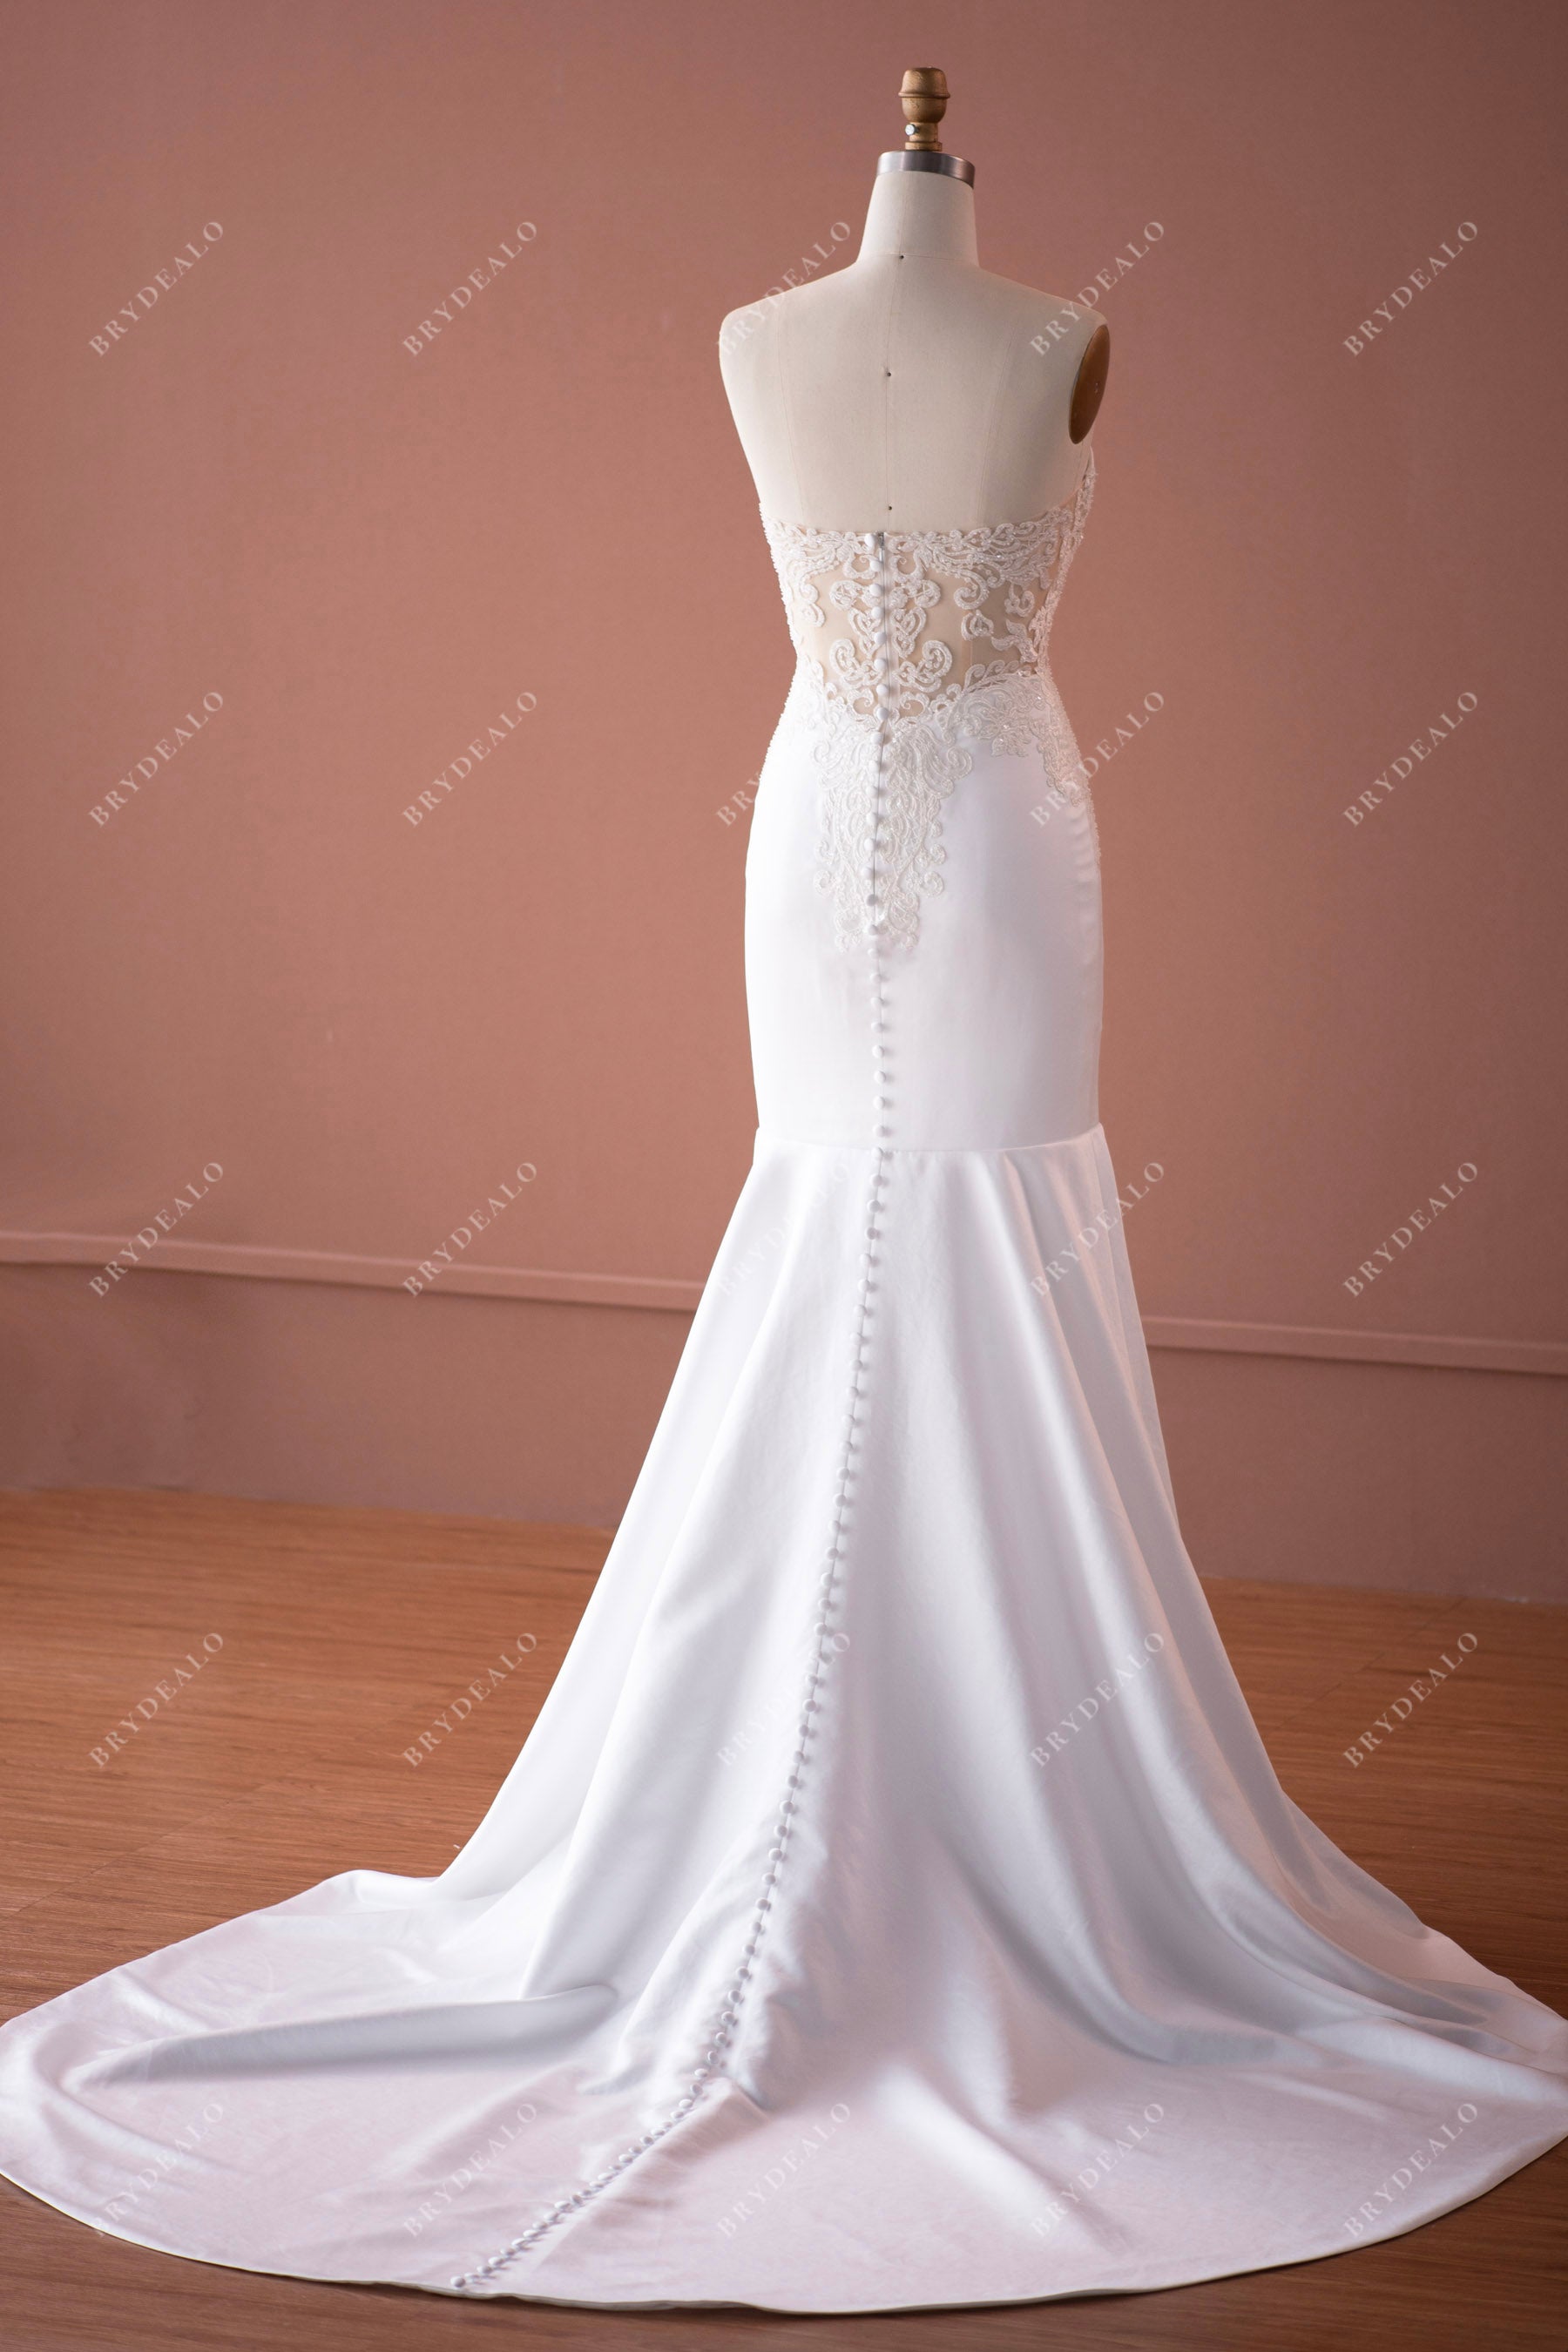 lace appliqued illusion back long train wedding dress with buttons adorned